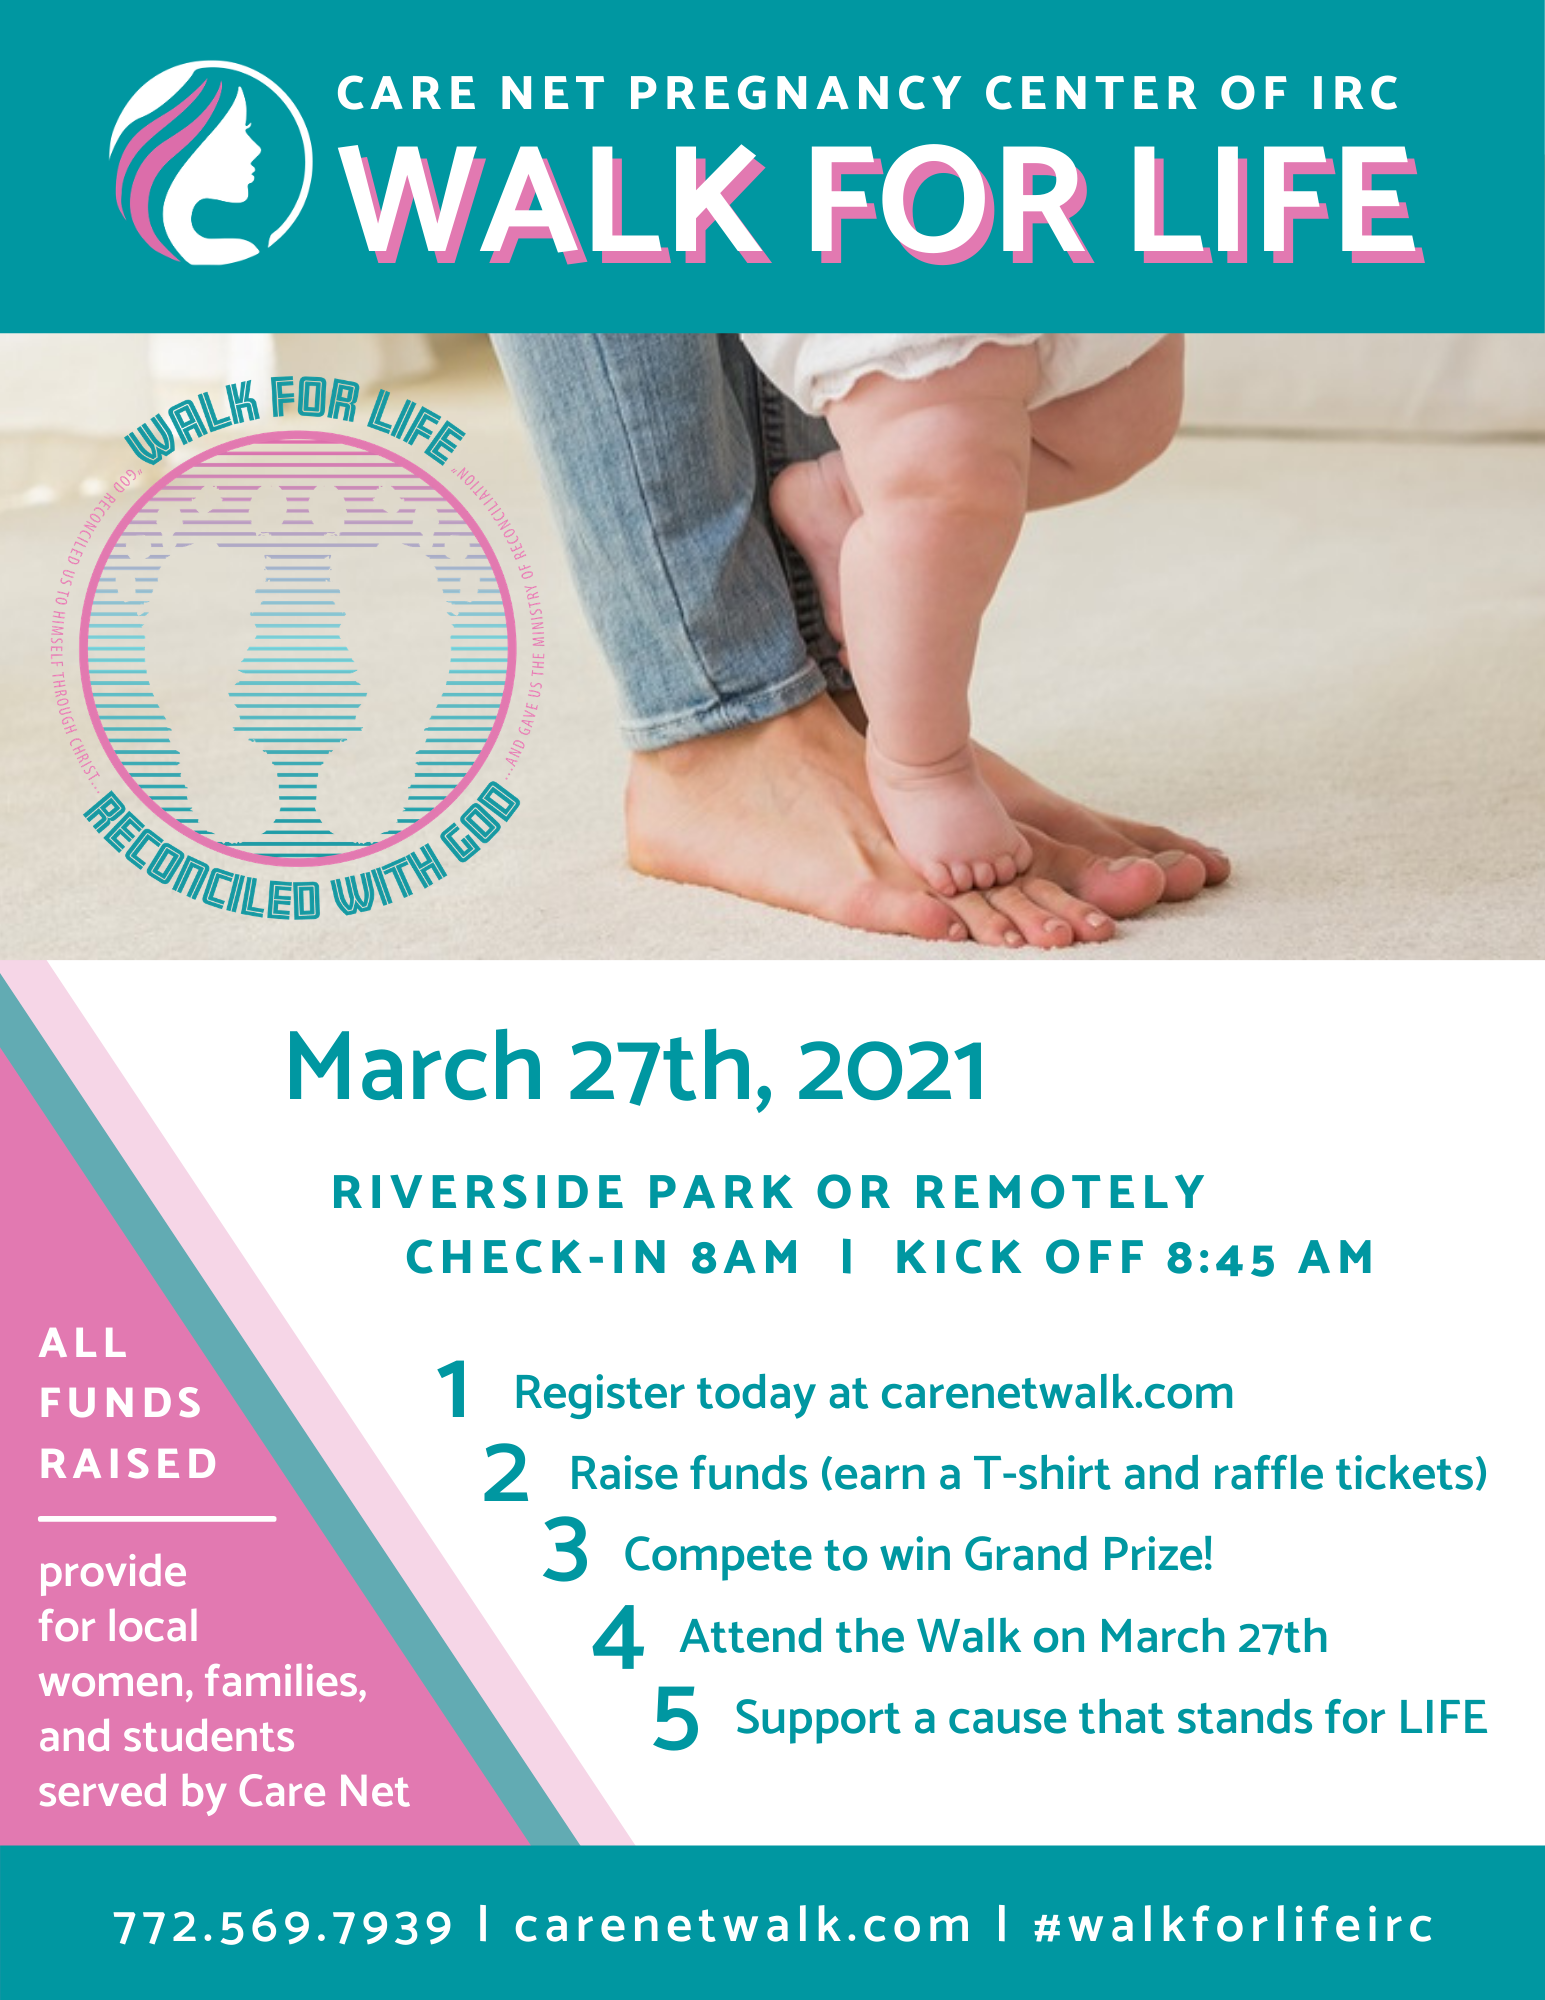 Walk for Life Care Net of Indian River County